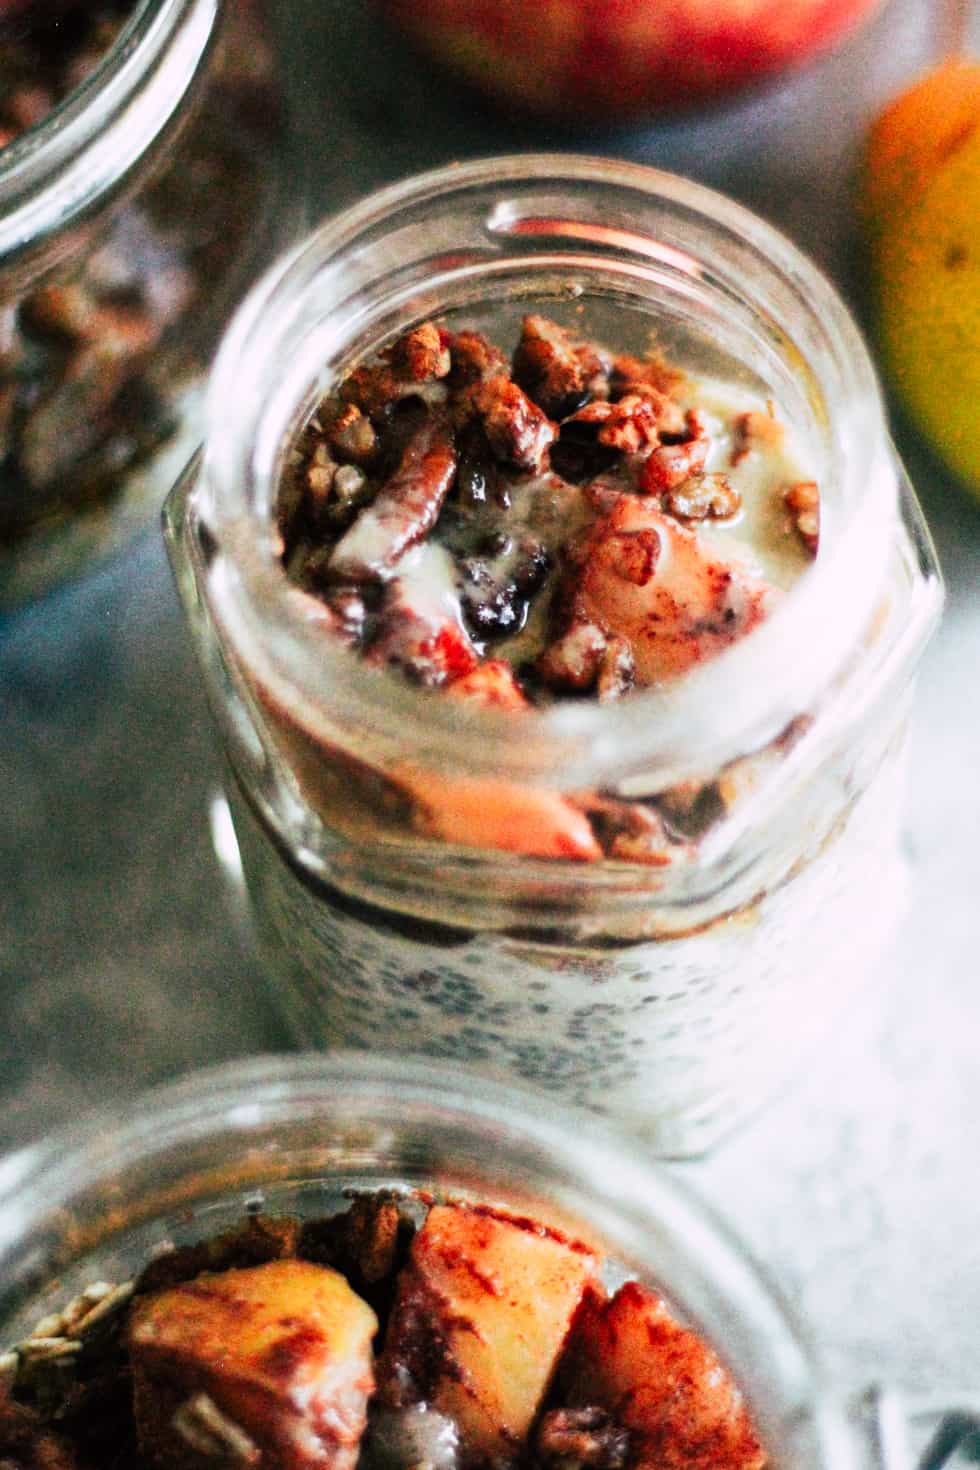 Jars filled with fruit and nuts.